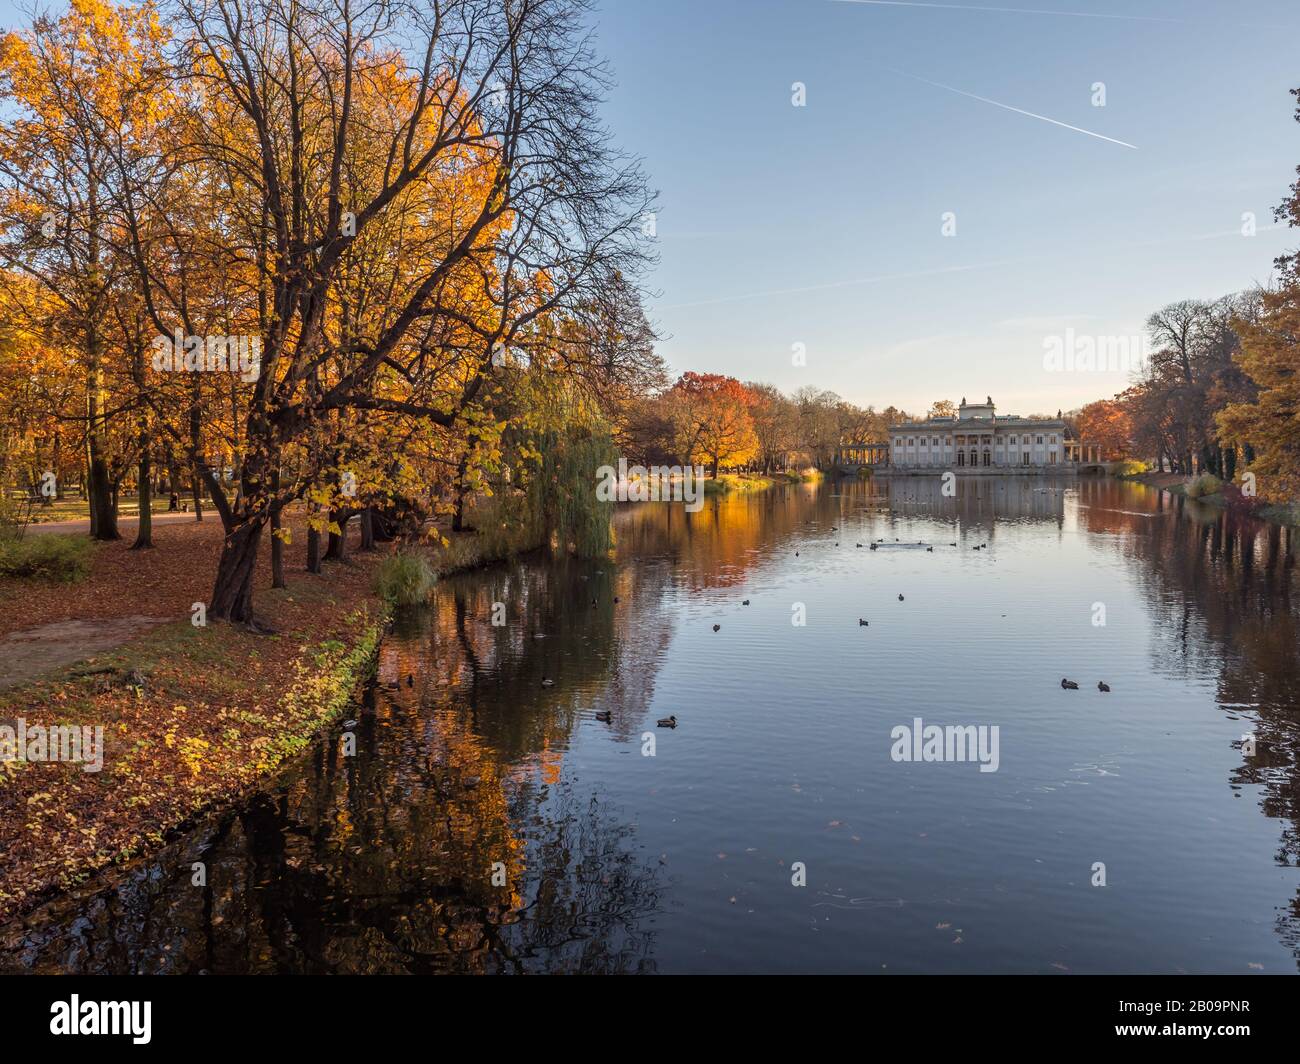 Warsaw, Poland - October 31, 2018: Palace on the Isle in the Royal Baths Park in autumn, Baths Park, Eastern Europe Stock Photo